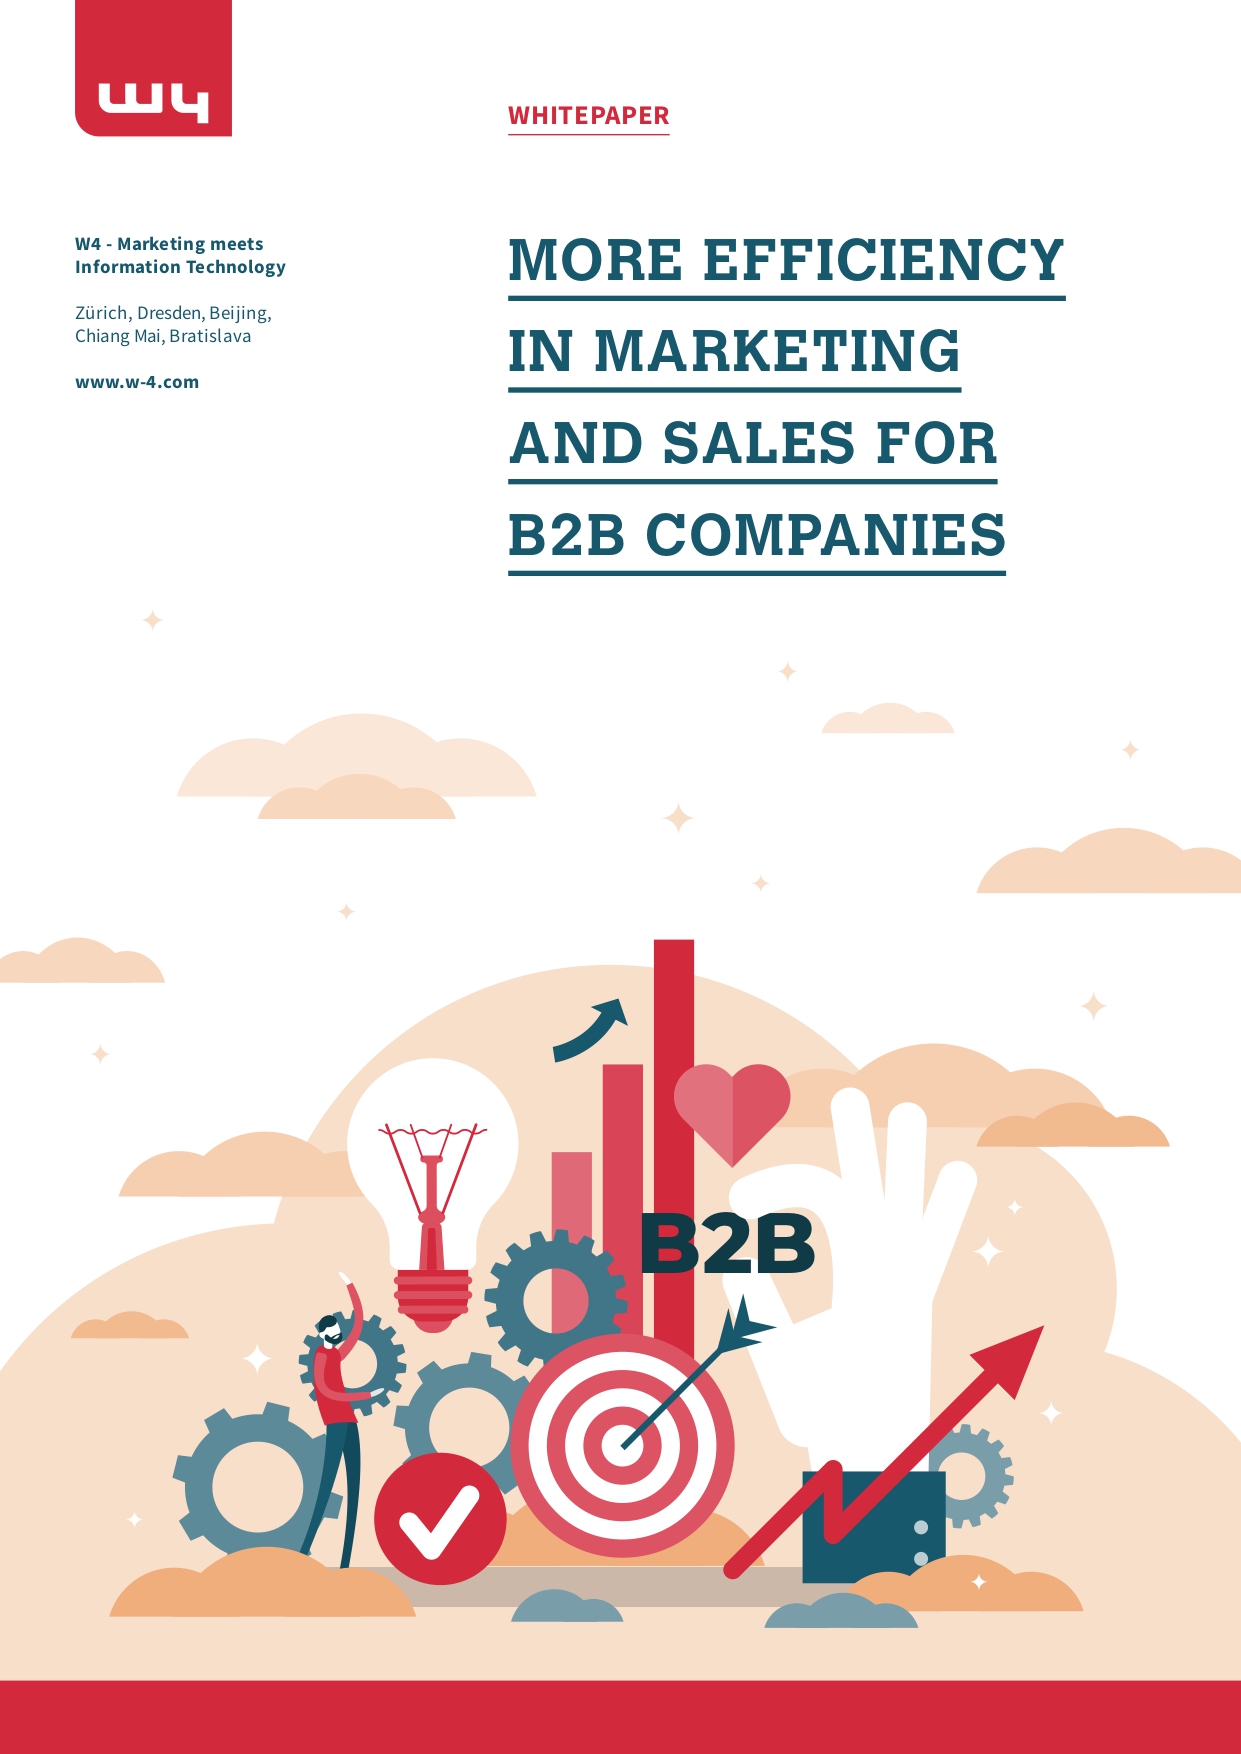 230808_Whitepaper_More_efficiency_in_Marketing_and_Sales_for_B2B Companies_EN_page-0001